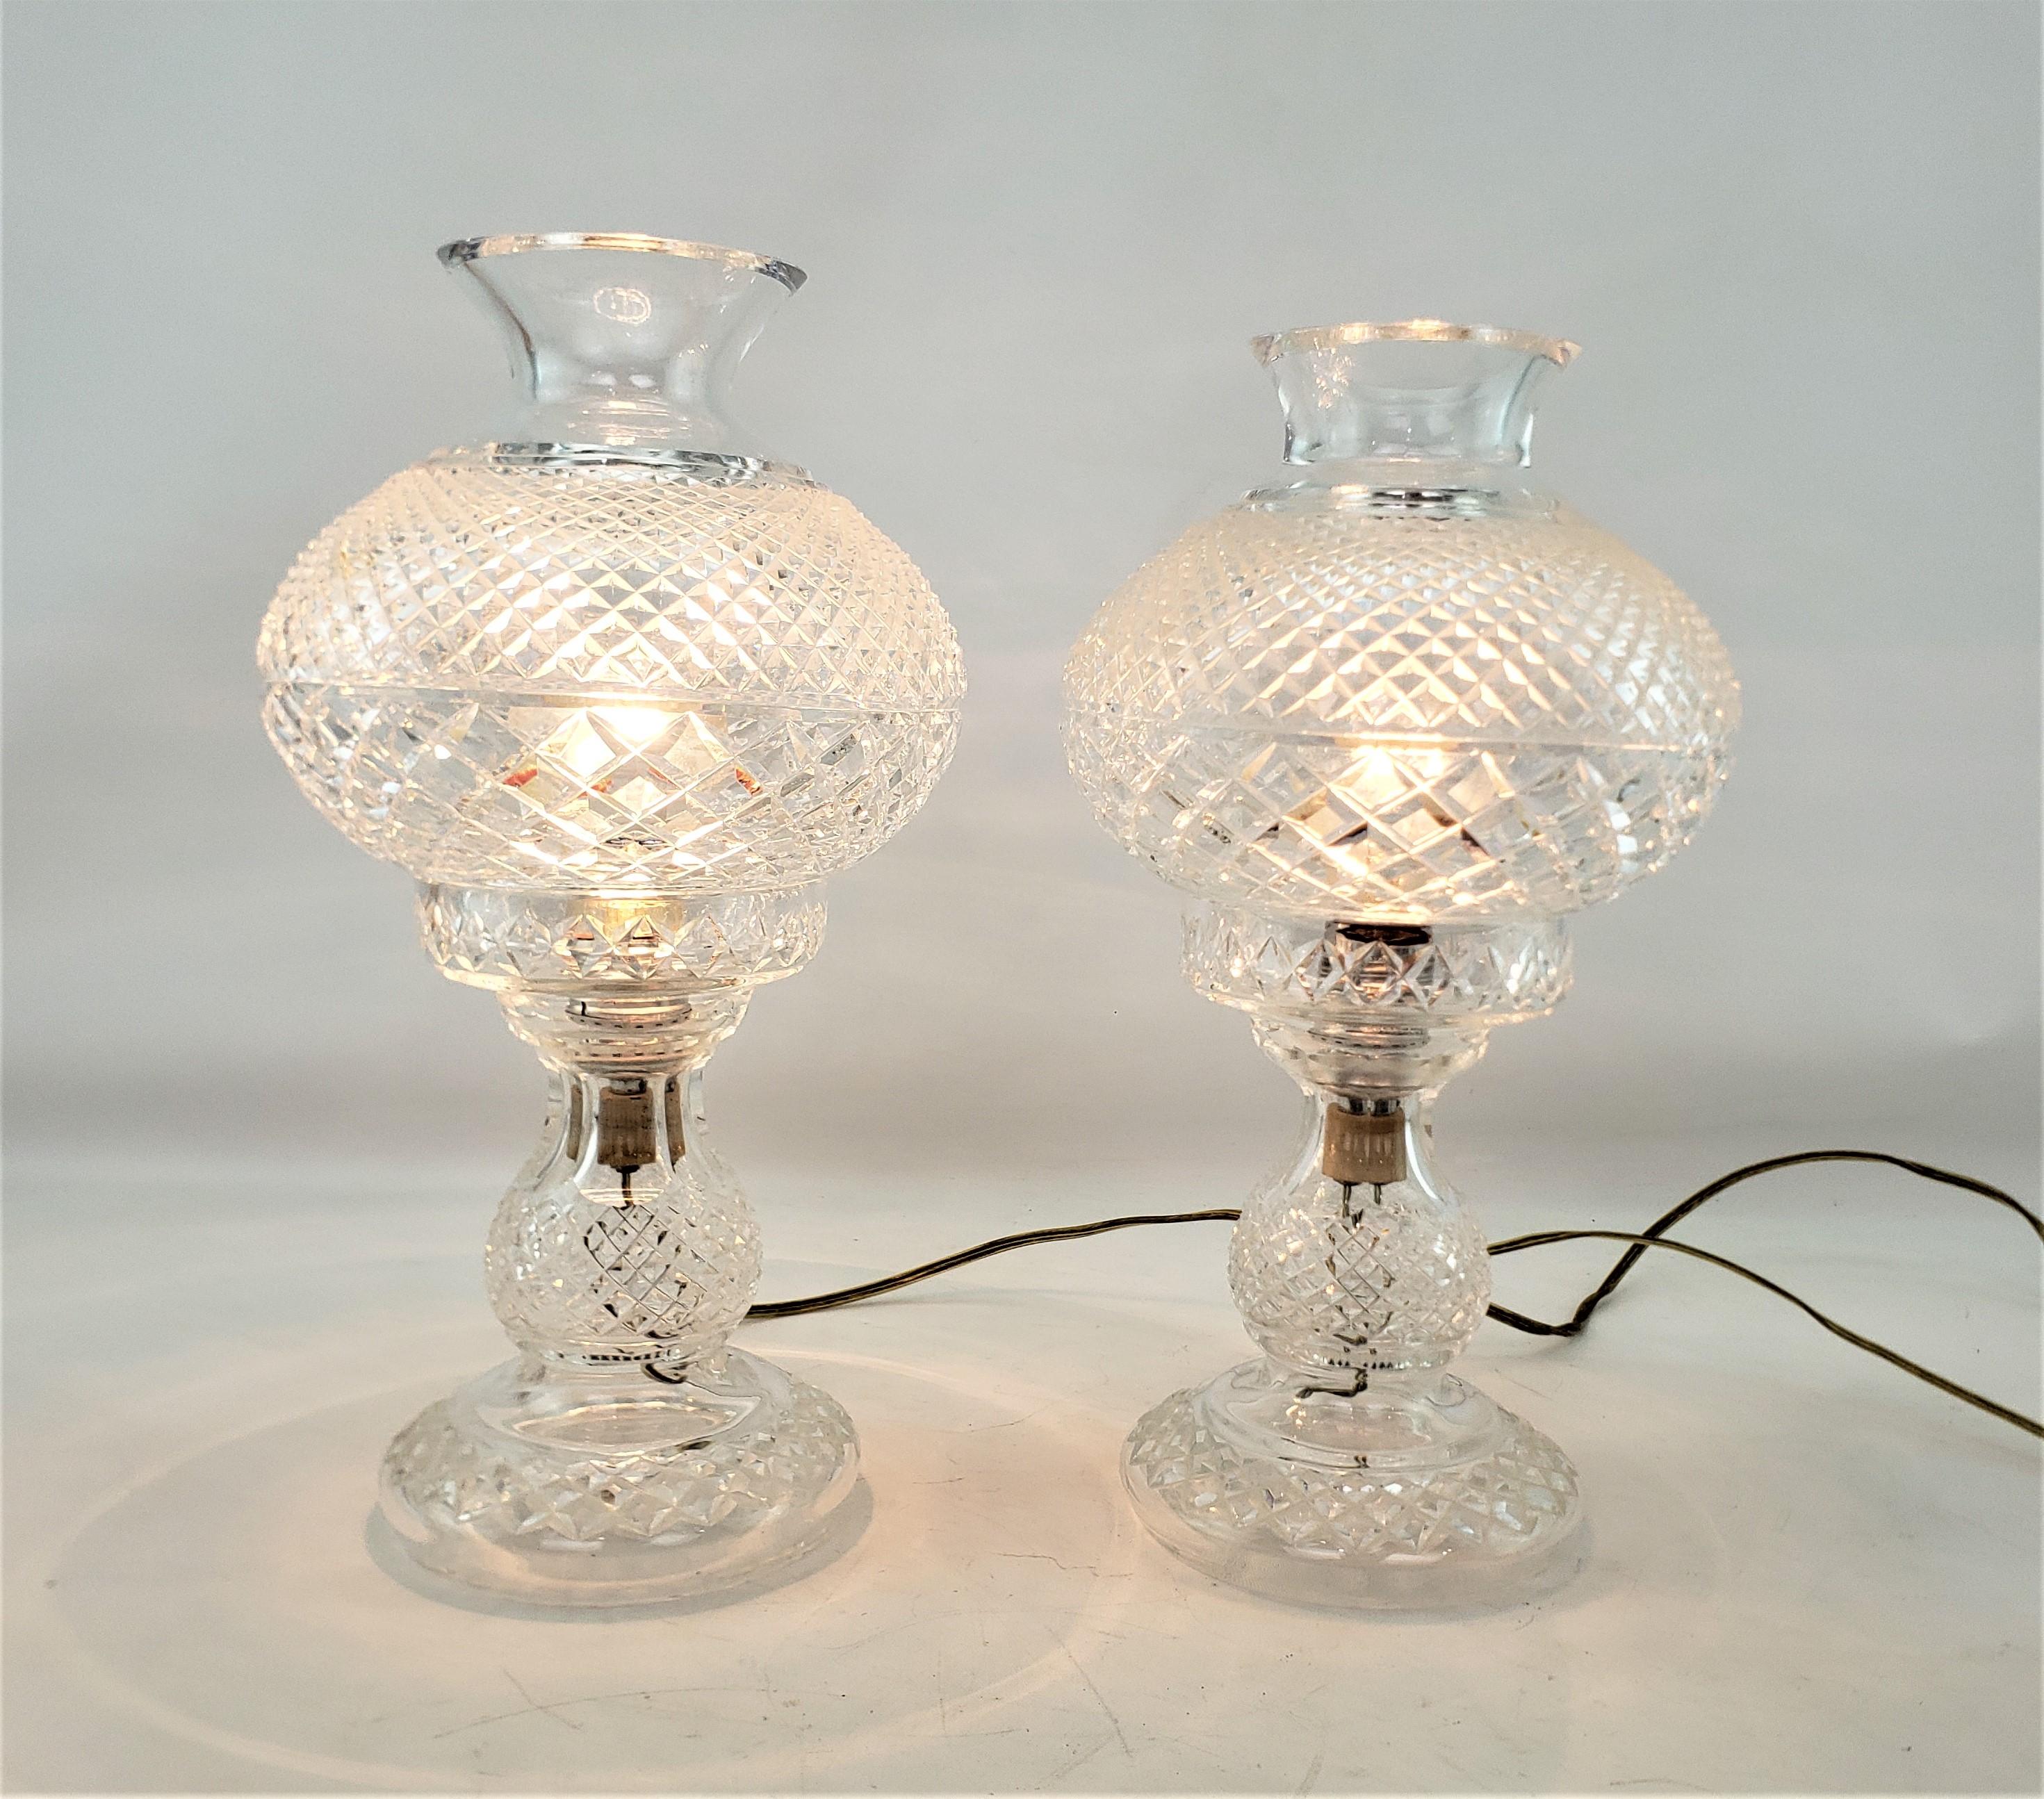 This pair of antique lamps were made by the renowned Waterford company of Ireland in approximately 1920 and done in a period style. The lamps are composed of cut crystal with a diamond pattern on both the shade and base. These hurricane styled lamps